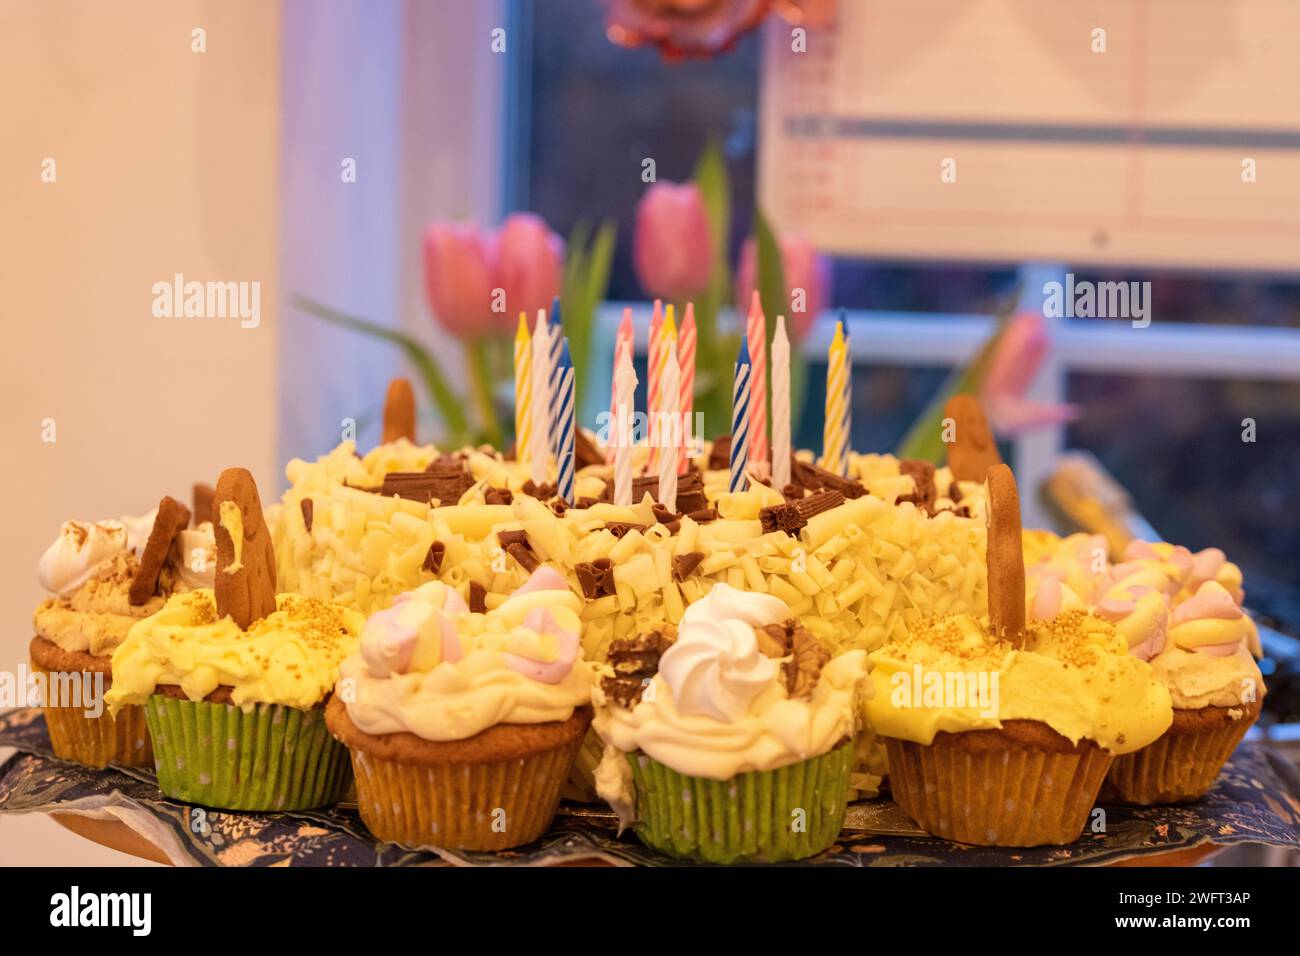 A white chocolate birthday cake with unlit candles surrounded by homemade cupcakes covered in individual decoration and butter icing Stock Photo